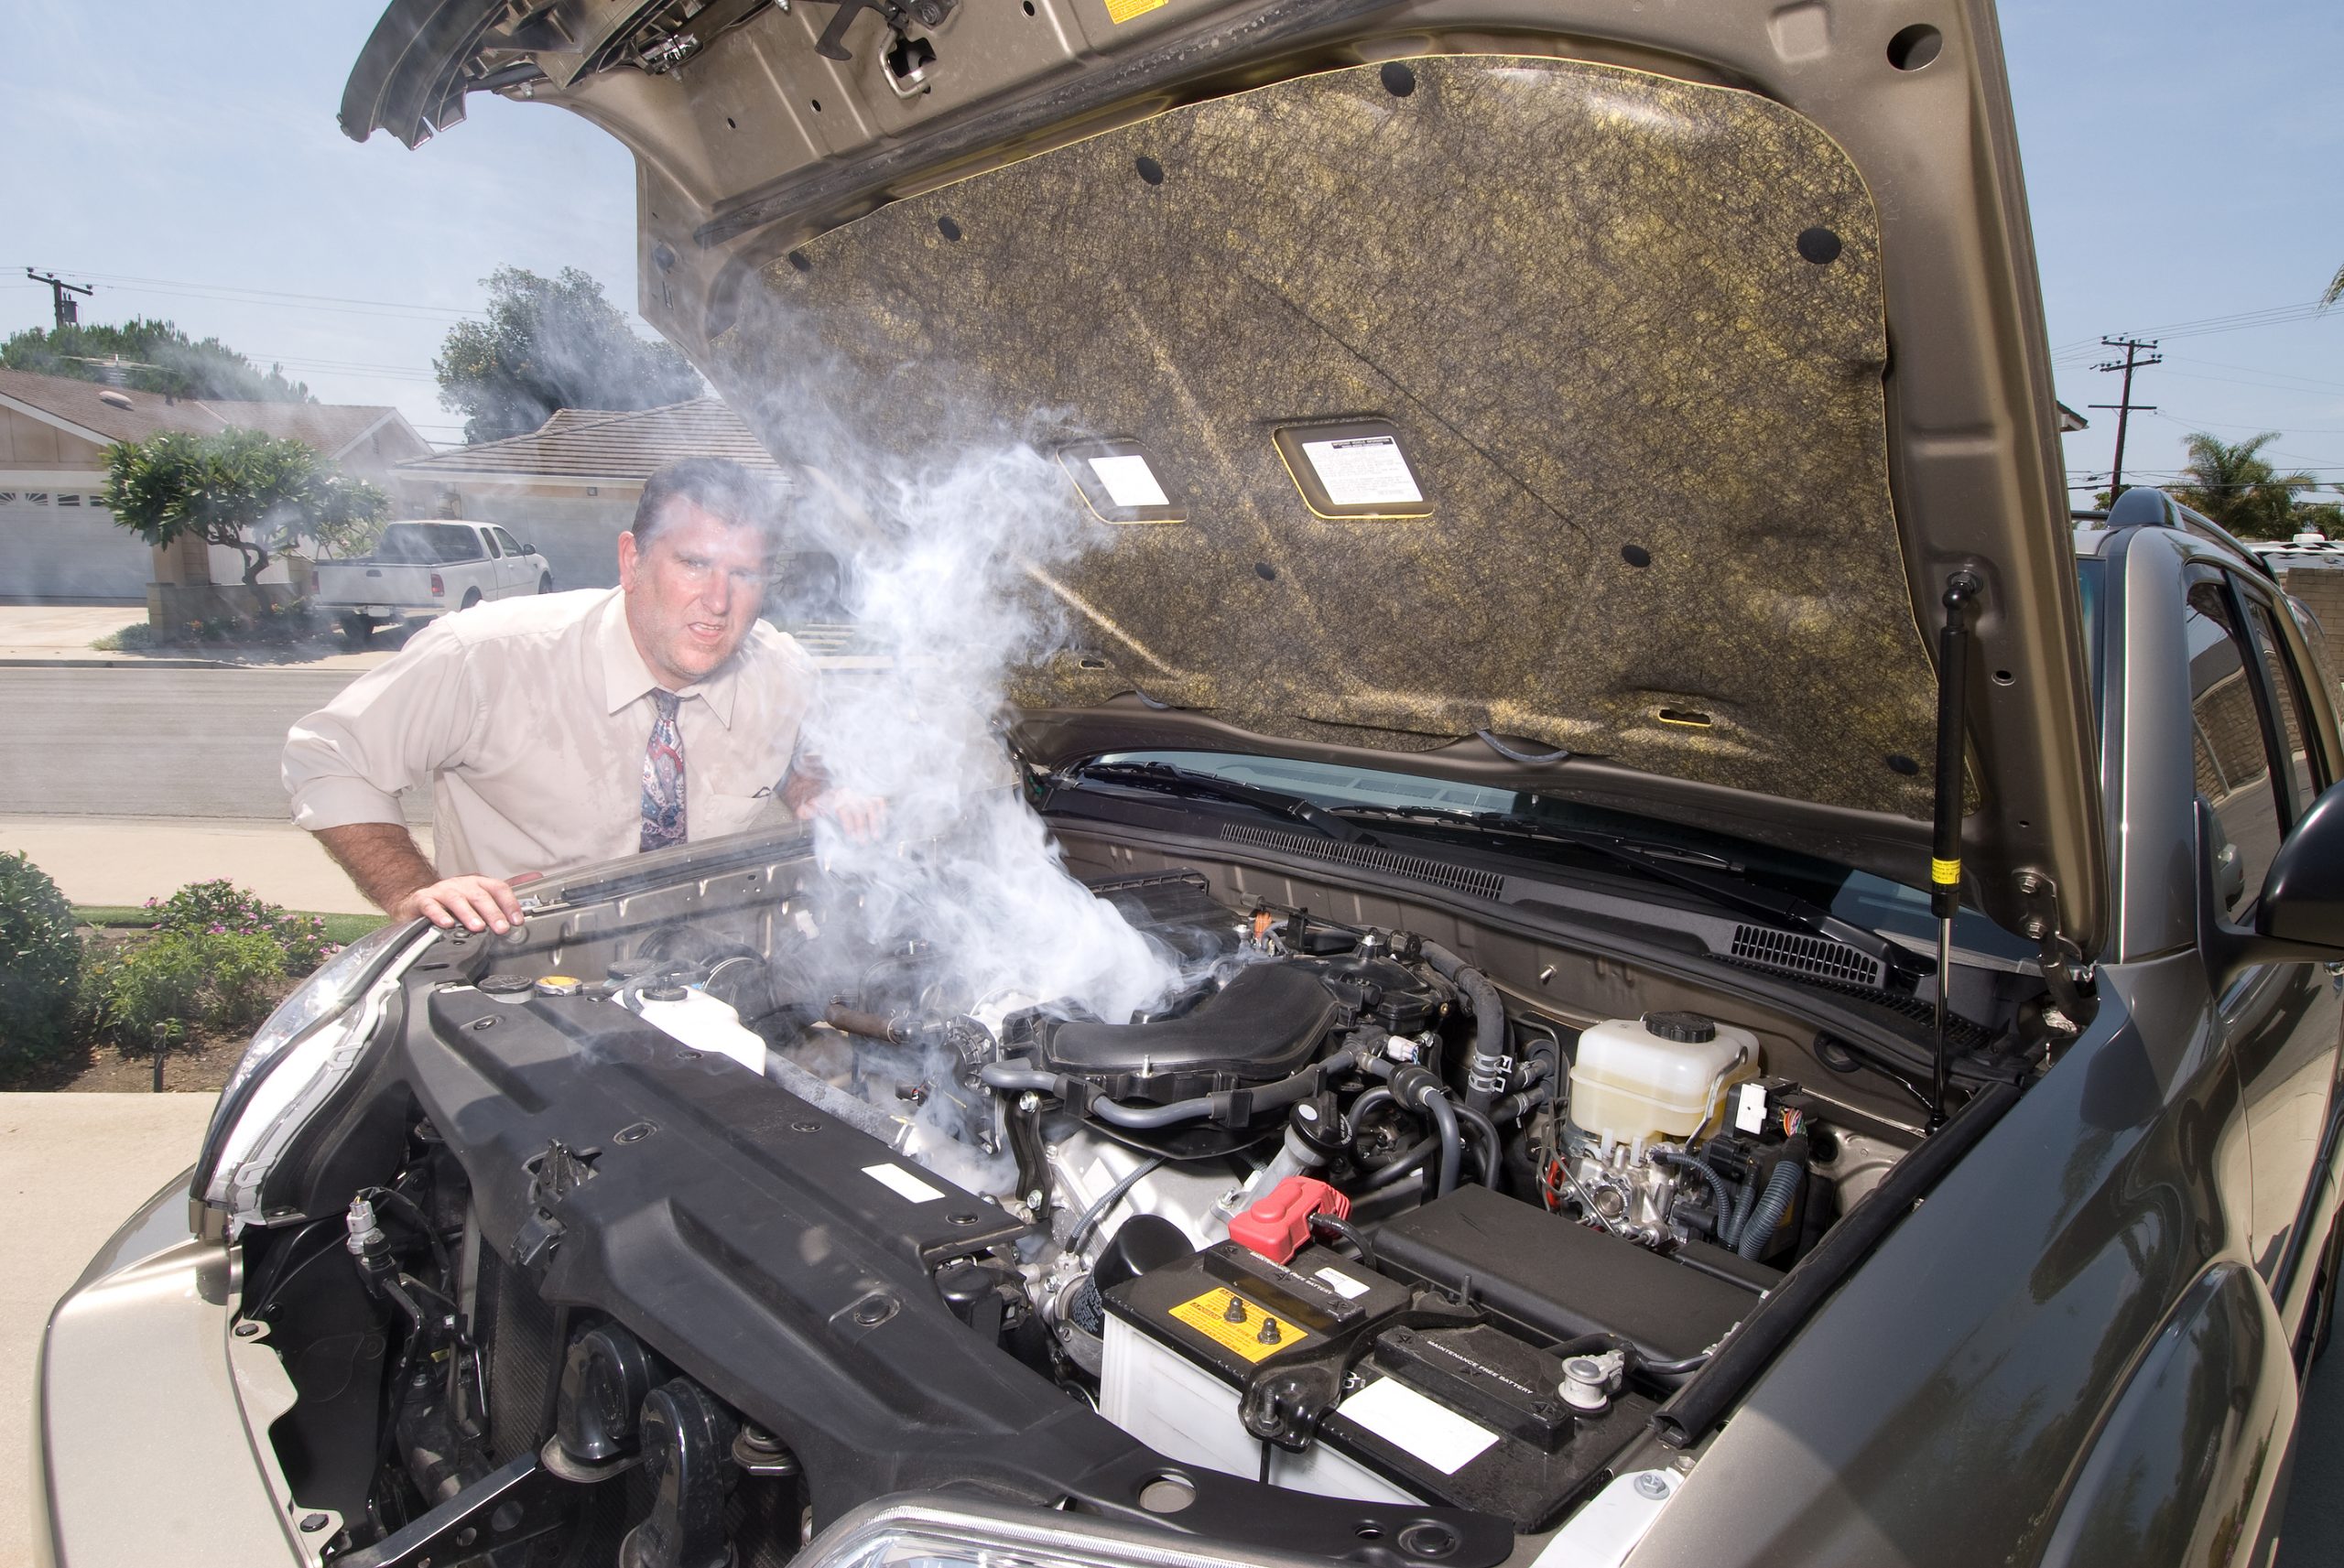 Why Is My Car Overheating? What to Do If You Have a Car Running Hot